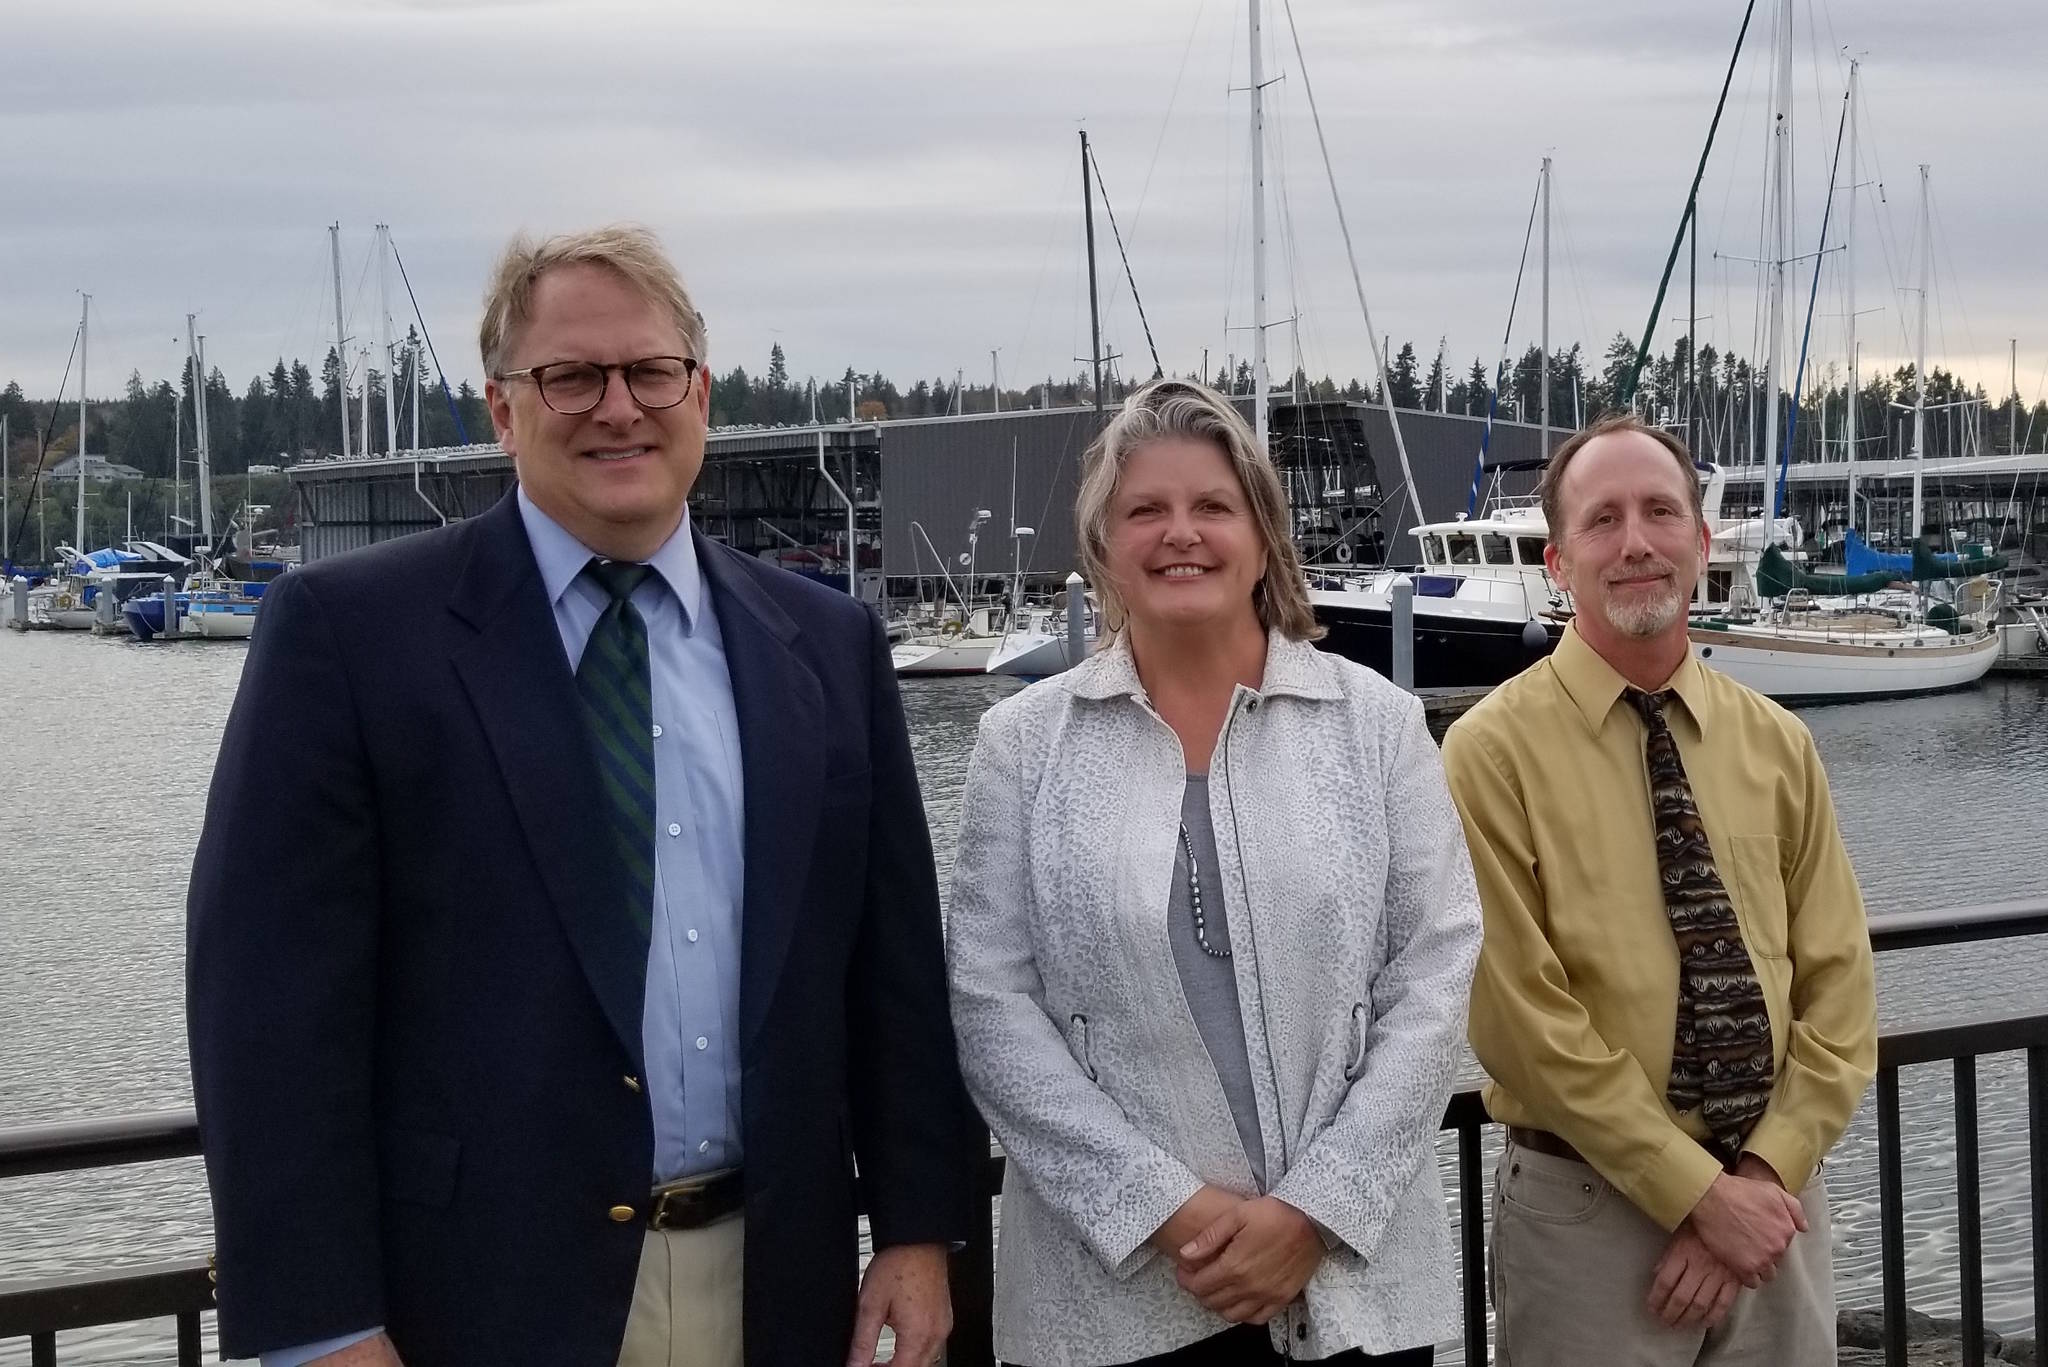 Greg Englin, Sam Gibboney and Josh Peters were recently announced as the three candidates being considered for the Port of Kingston’s executive director position. Nick Twietmeyer | Kitsap News Group.